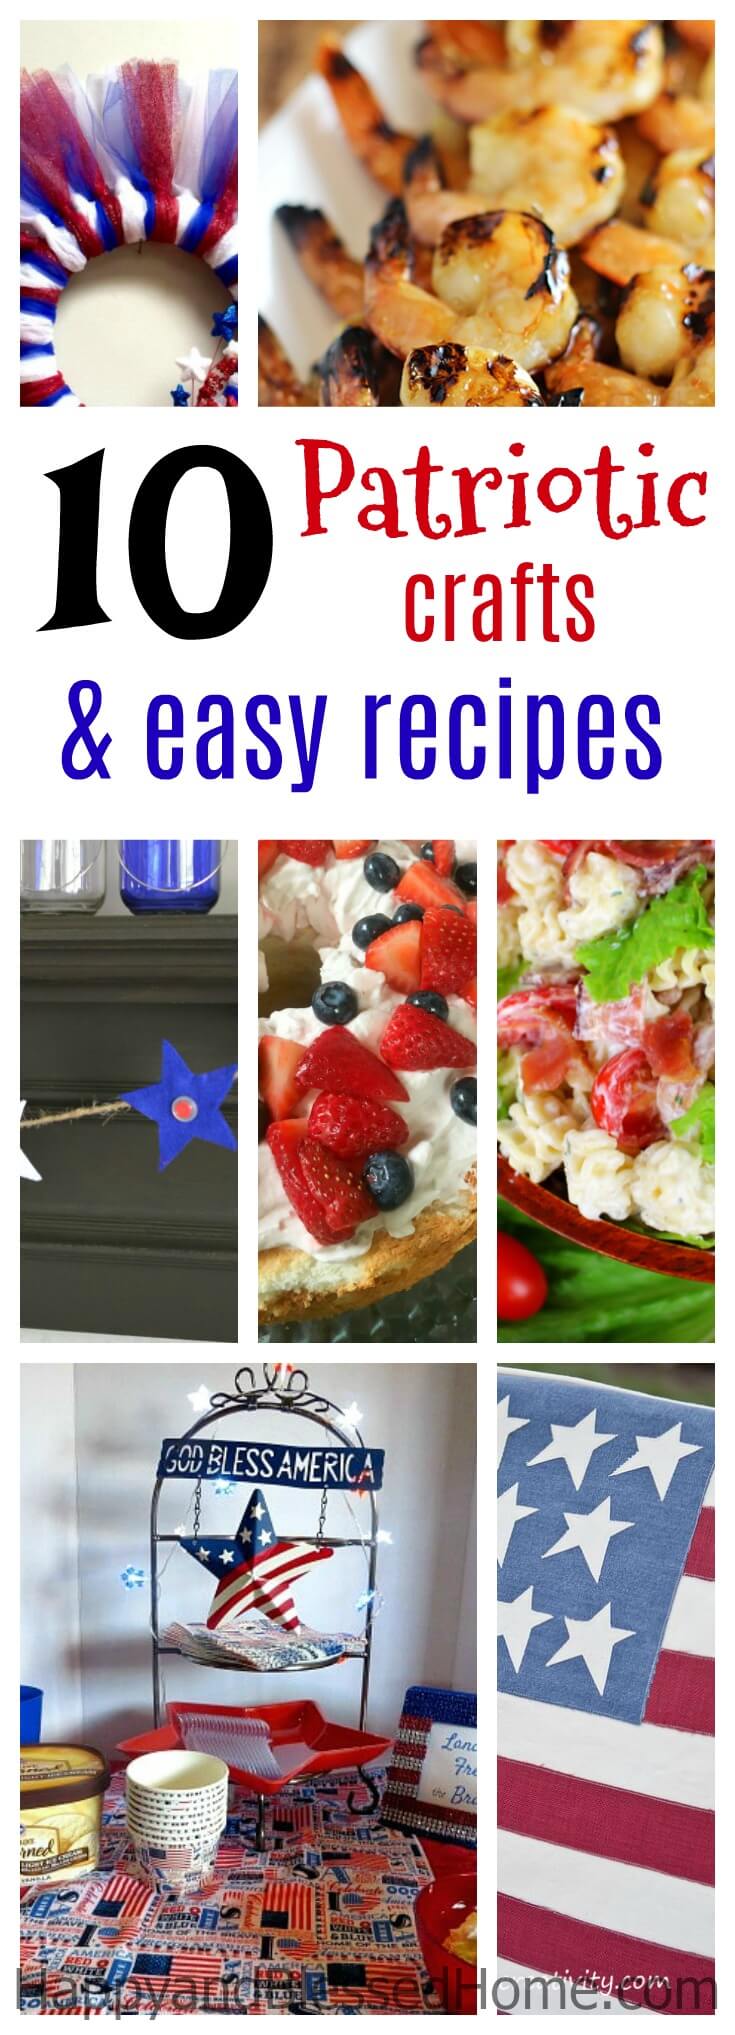 10 Patriotic Crafts and Easy Recipes perfect for Memorial Day 4th of July or Veterans Day